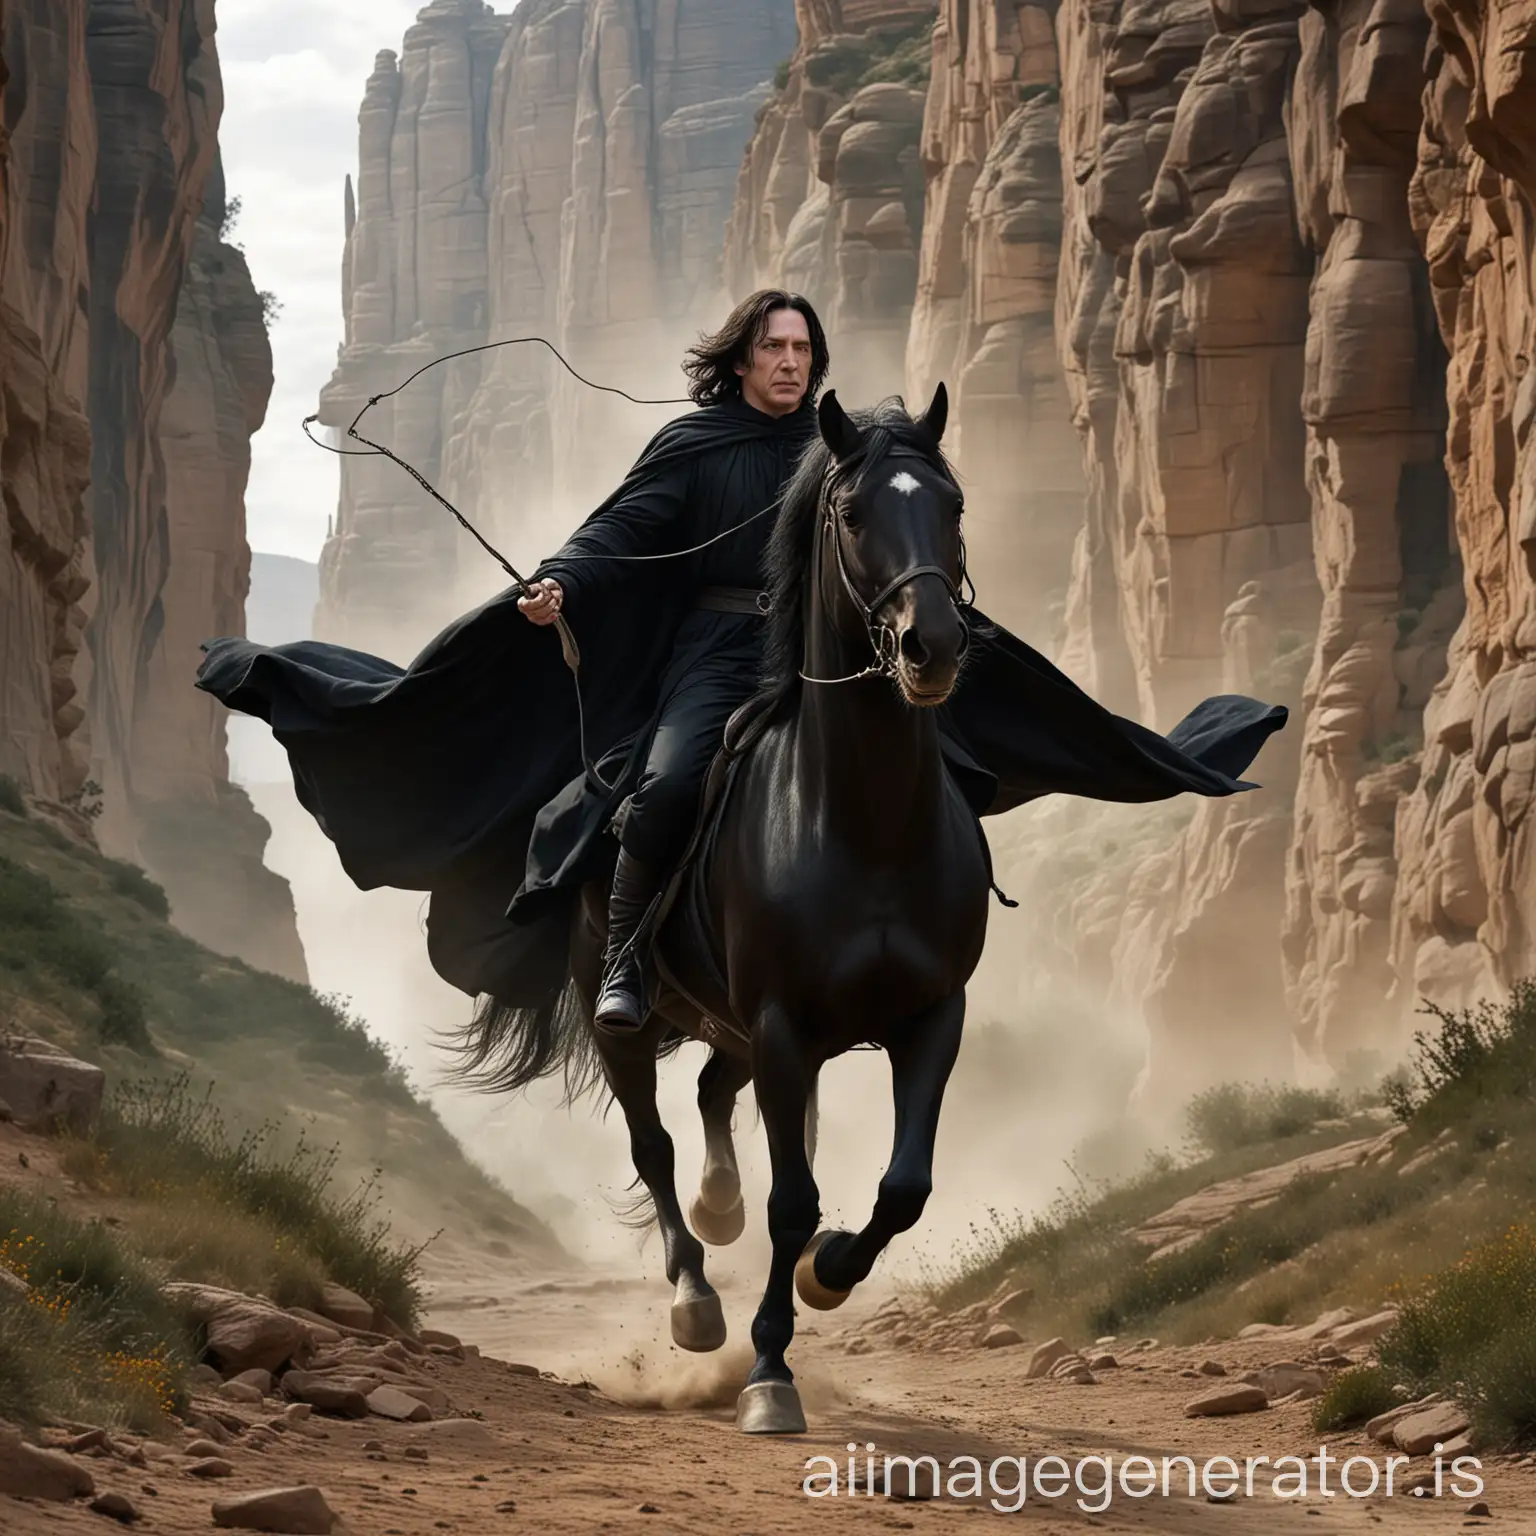 Severus-Snape-Riding-a-Black-Horse-with-Lasso-in-Hand-through-Canyon